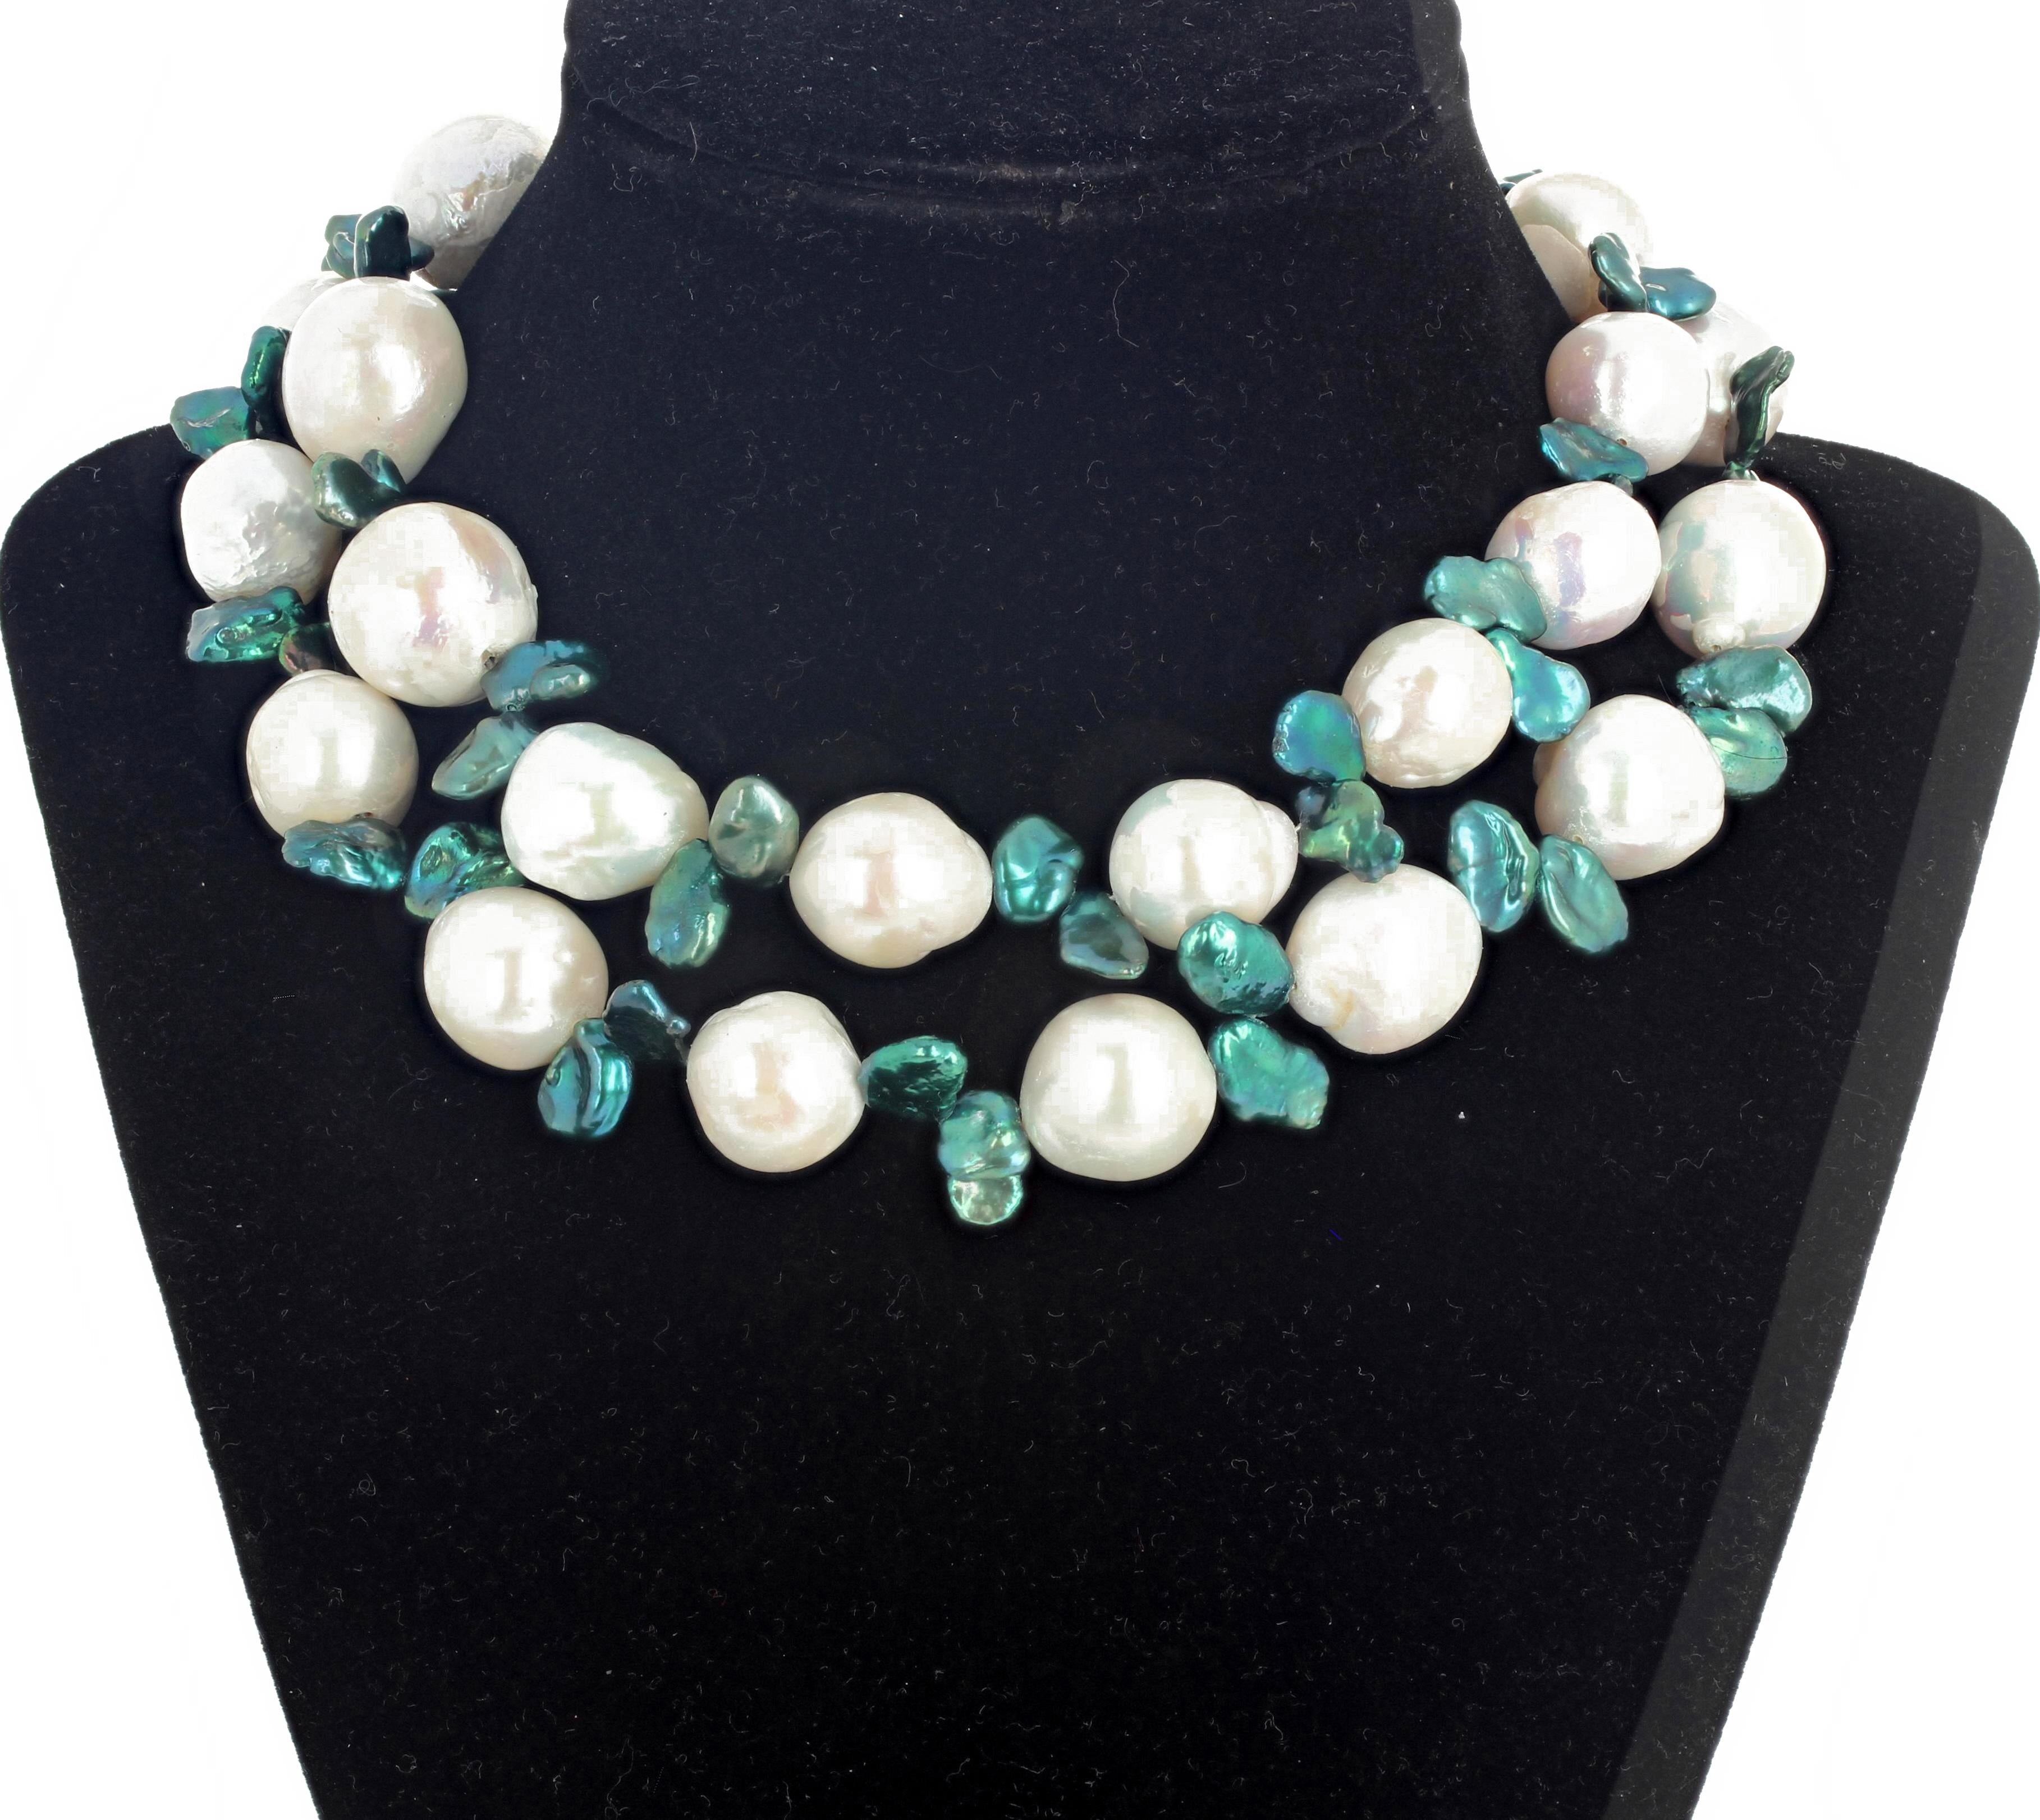 From 15mm to 20mm beautiful white freshwater cultured Pearls enhanced with petals of blue-green tone peacock Pearls set in a handmade necklace 29 inches long.  The clasp is also freshwater cultured Pearl.   